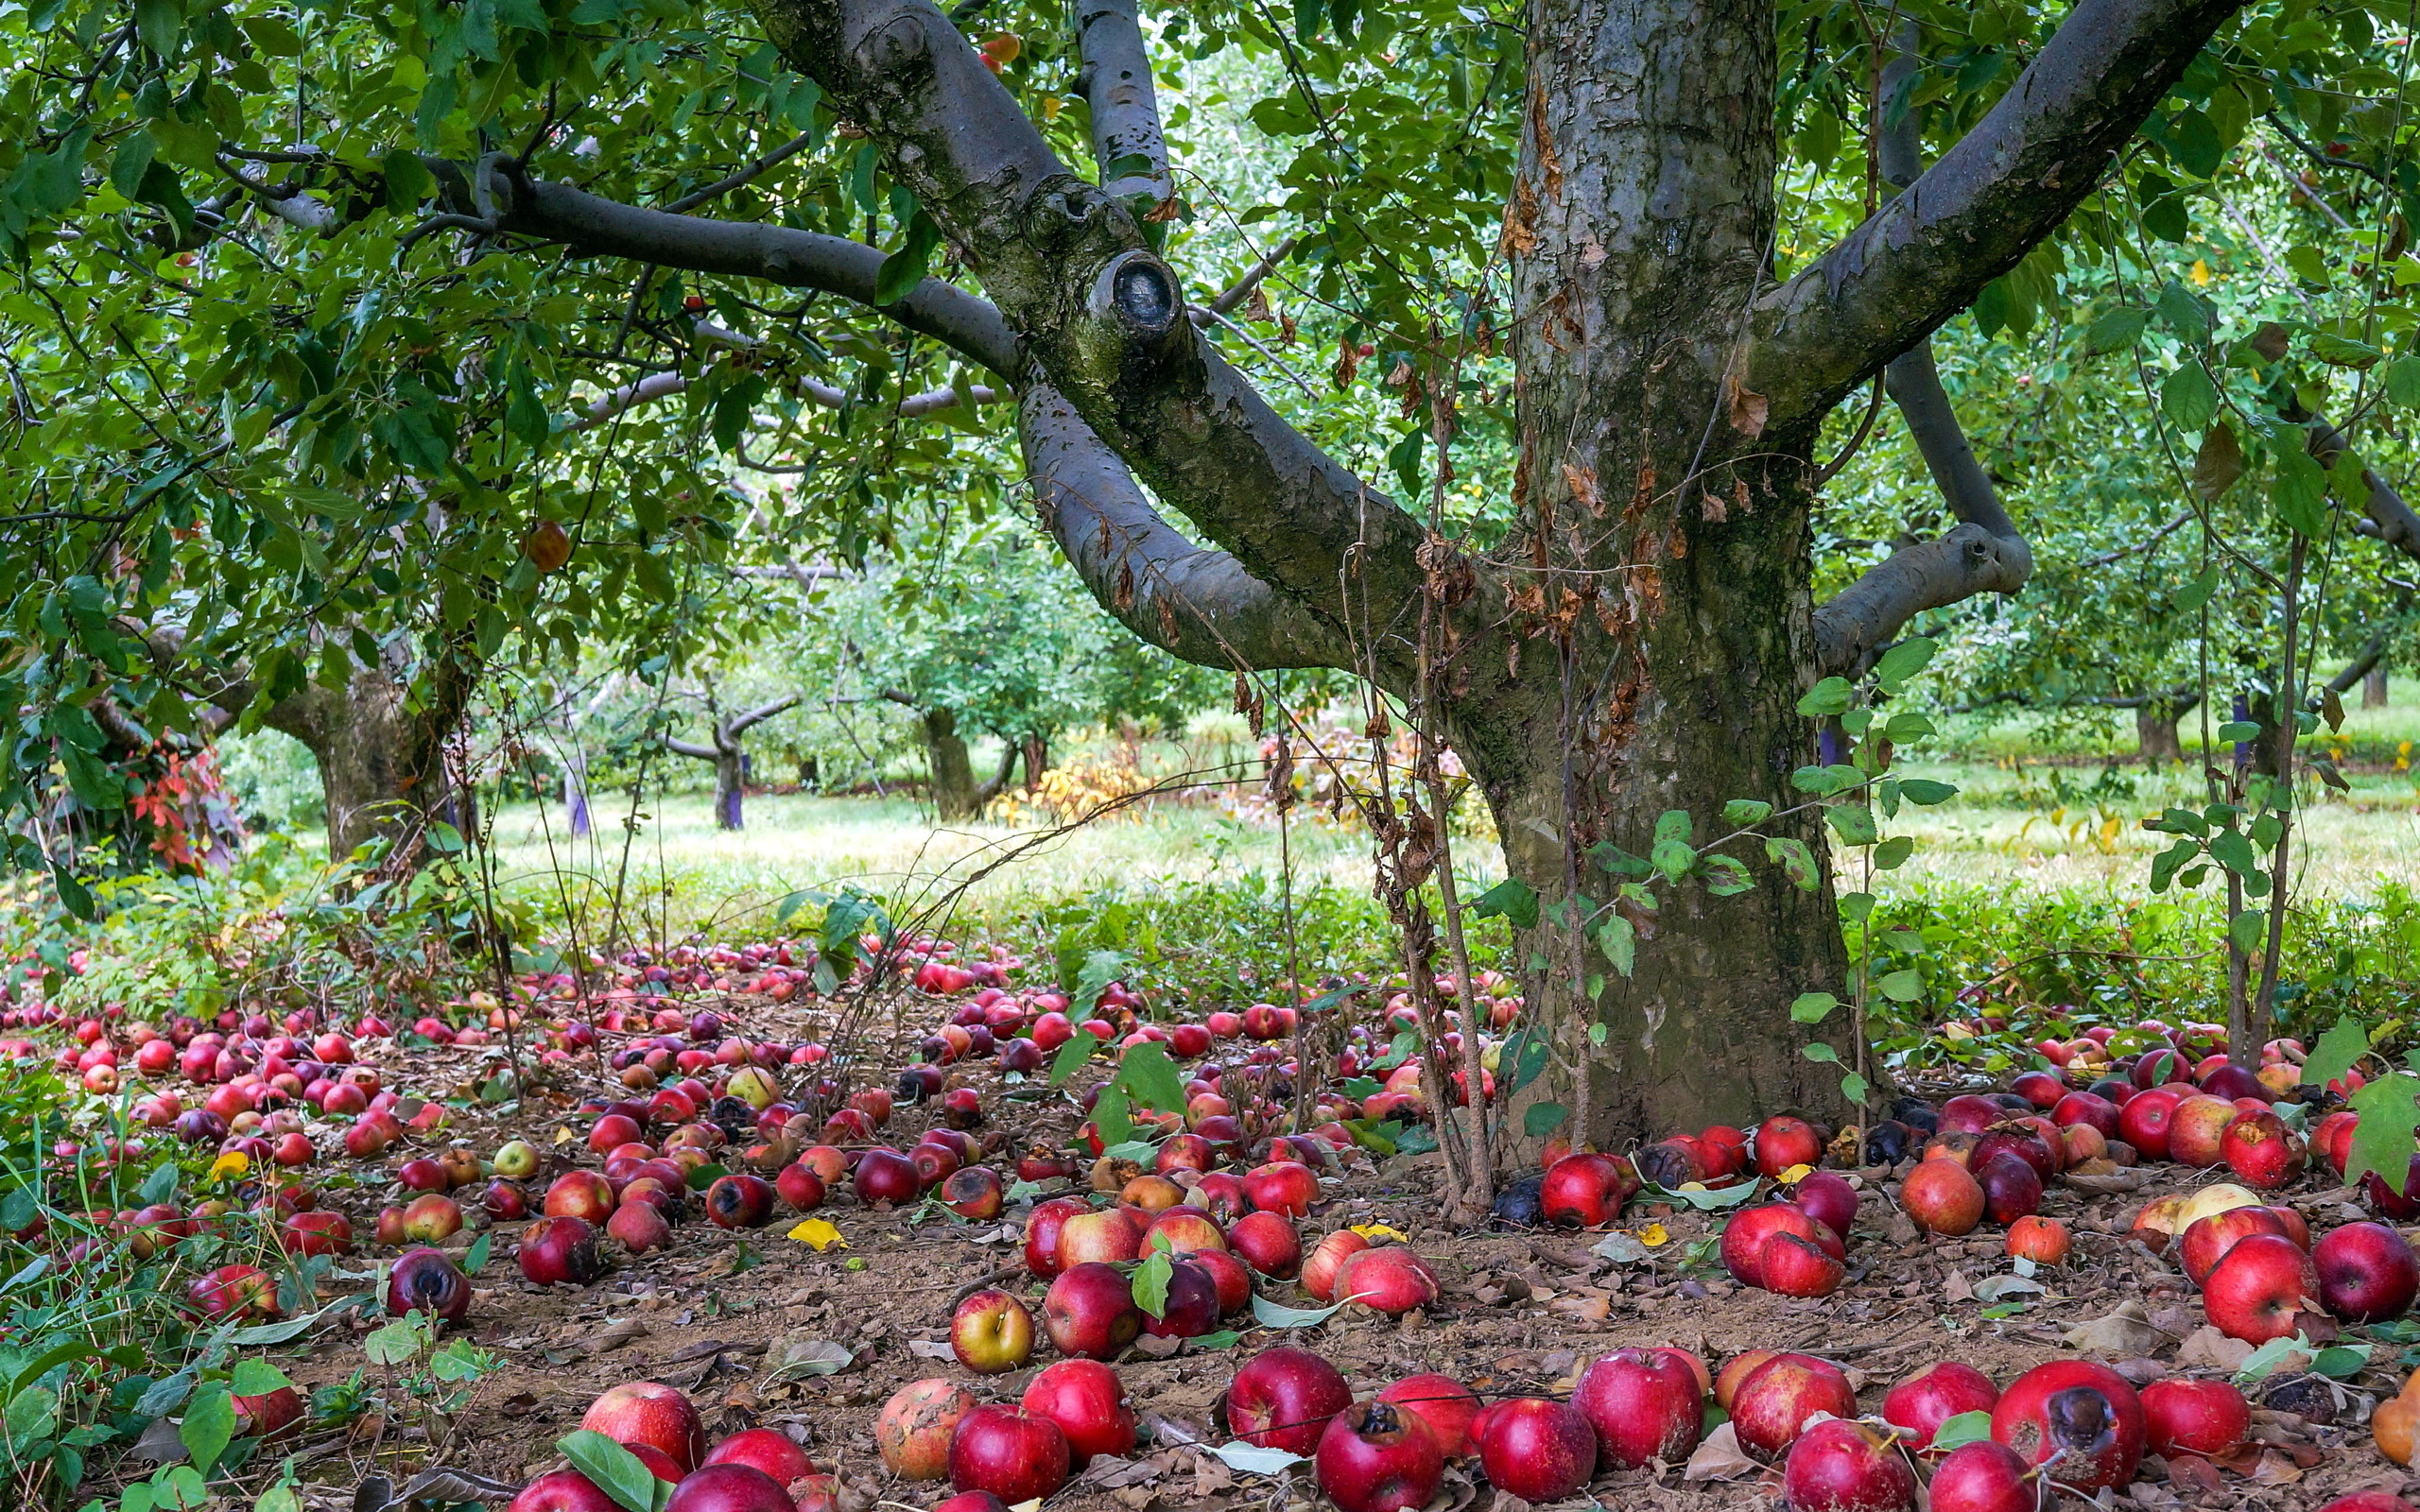 General 2560x1600 nature apples trees